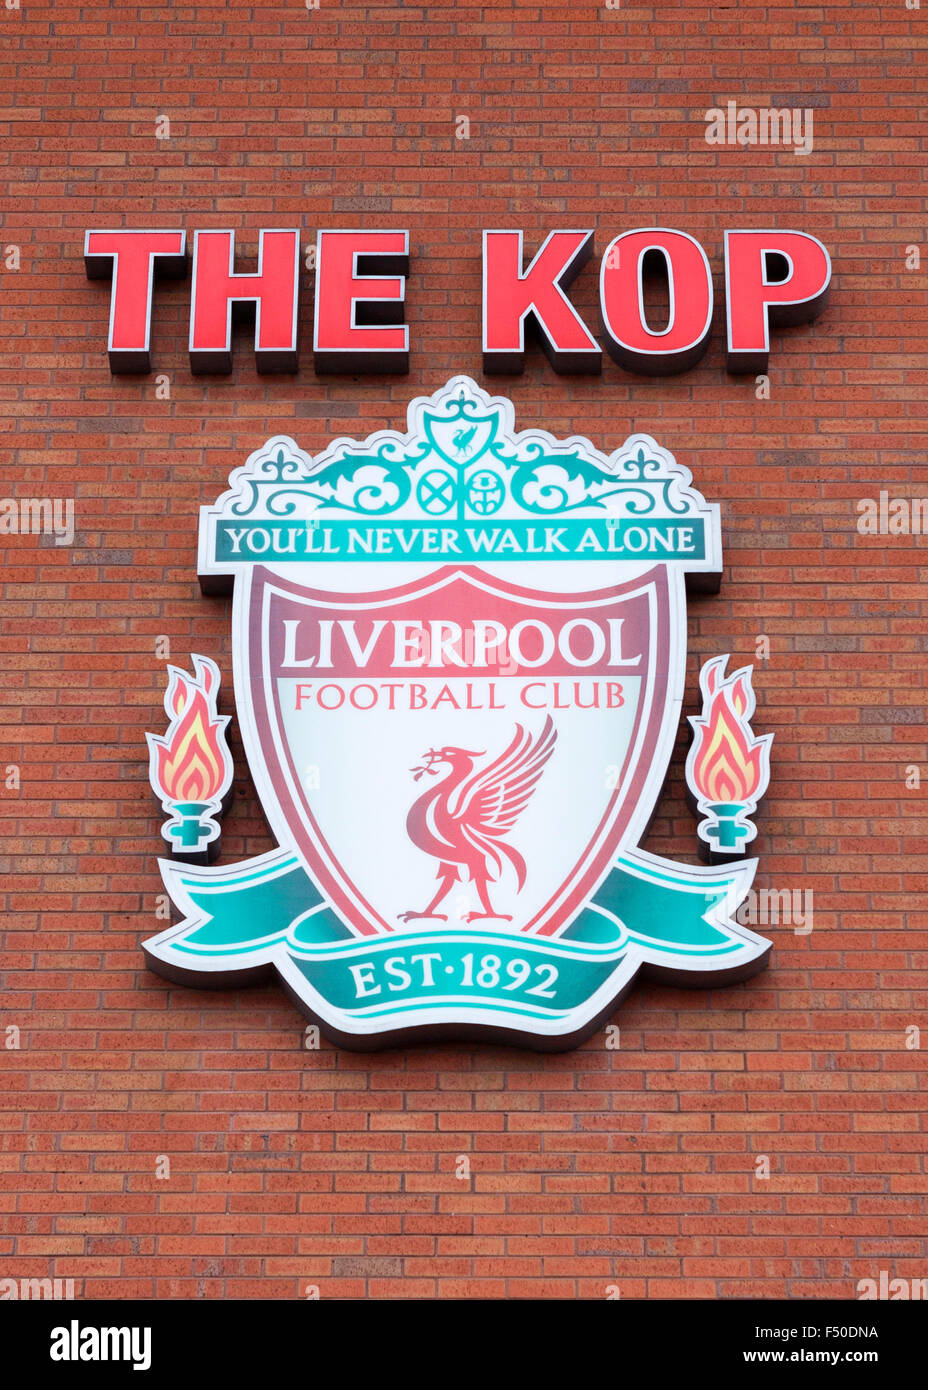 Liverpool Fc Logo High Resolution Stock Photography and Images - Alamy